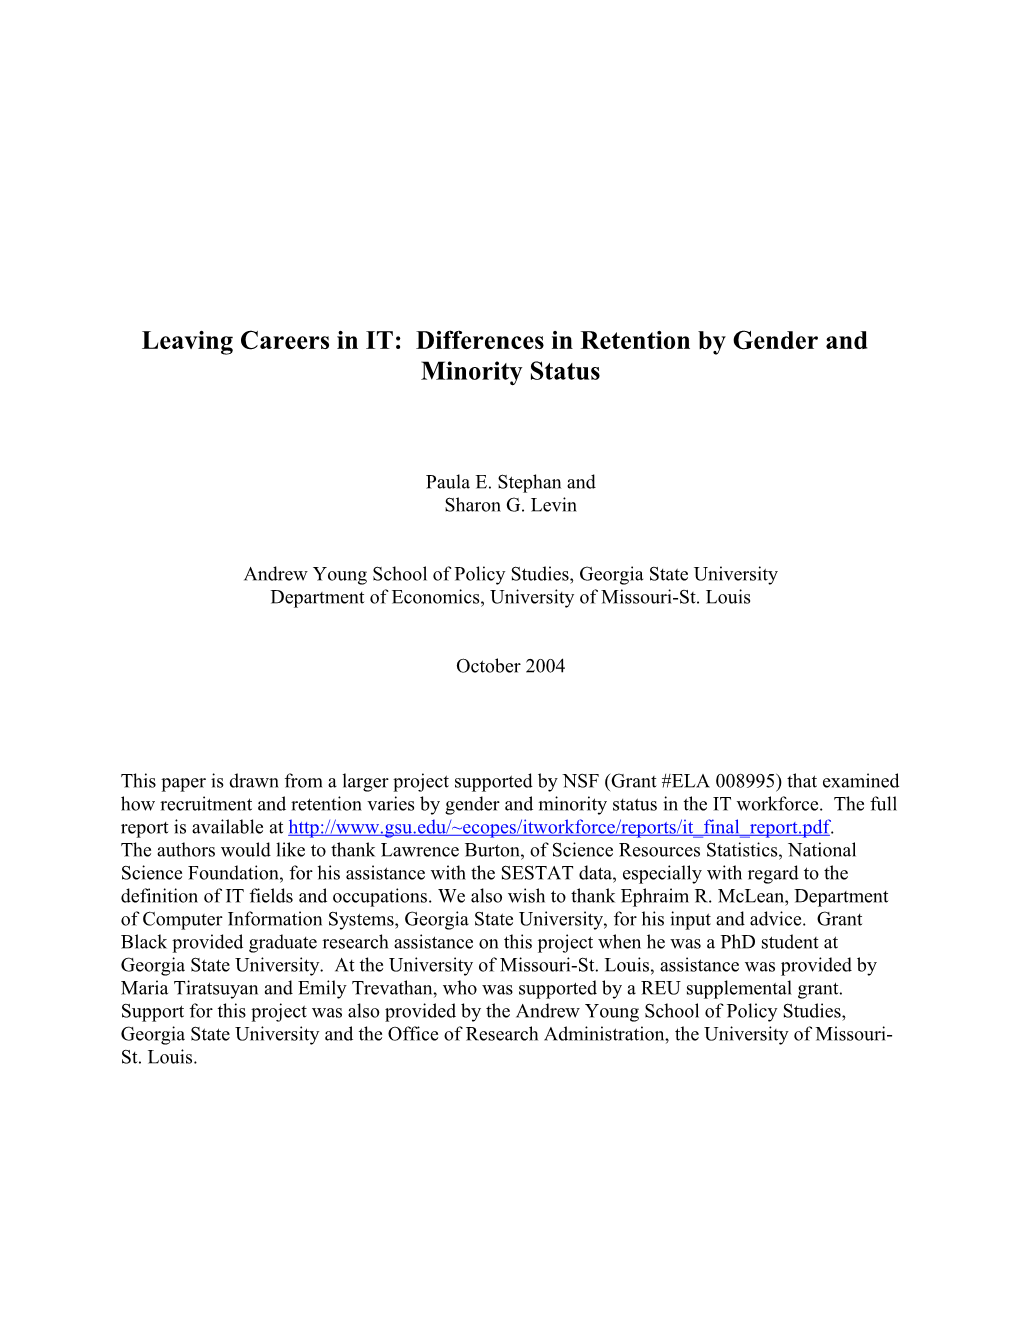 Leaving Careers in IT: Differences in Retention by Gender and Minority Status